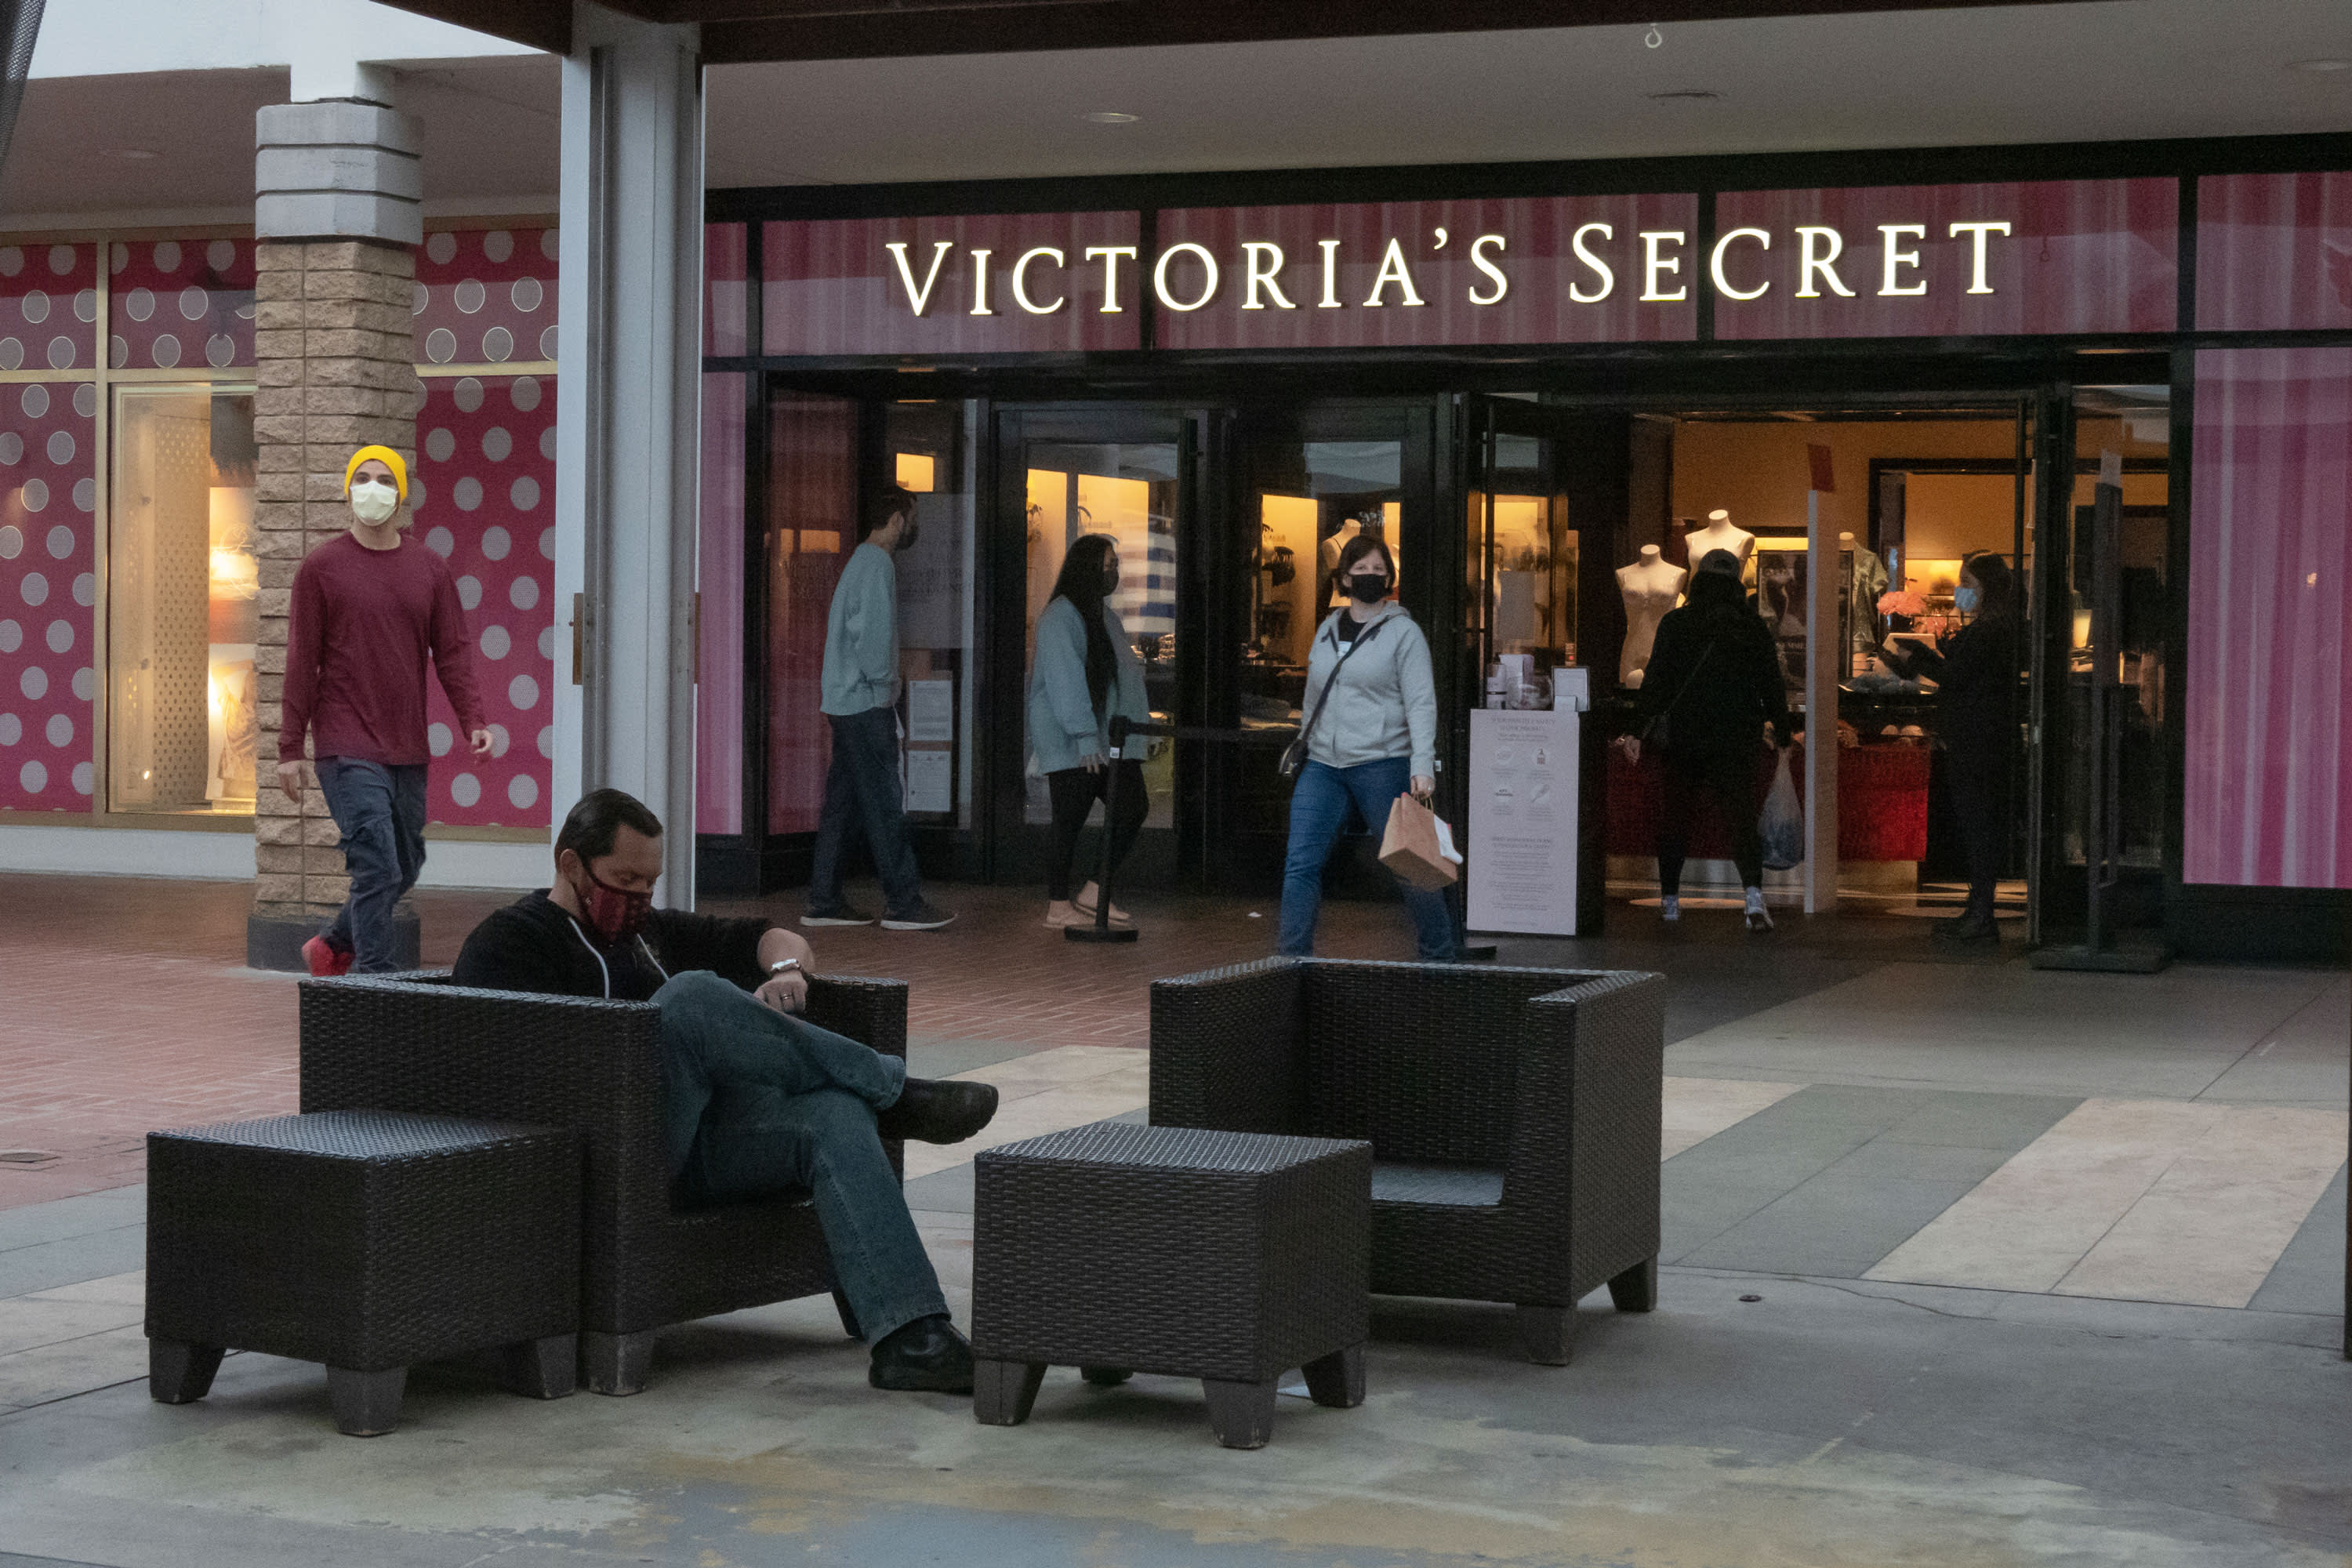 s secret outlet where shoppers can save up to 79% off